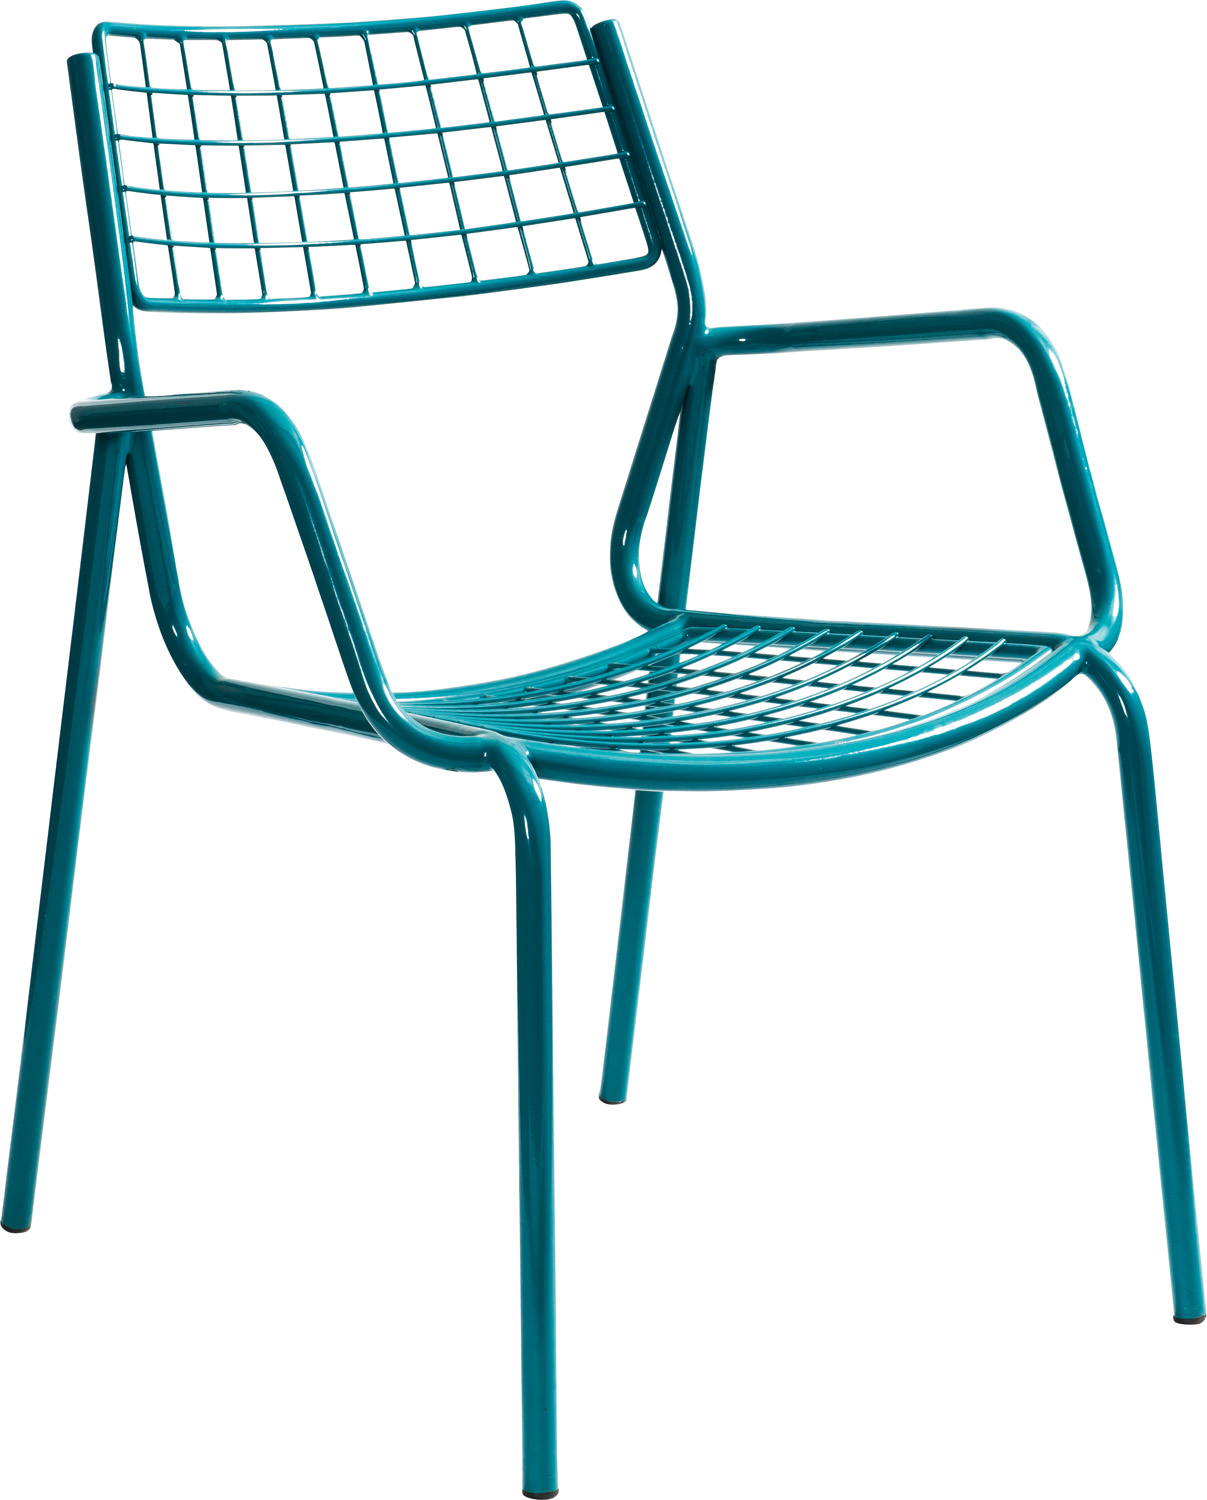 JS-8380 metal wire chair